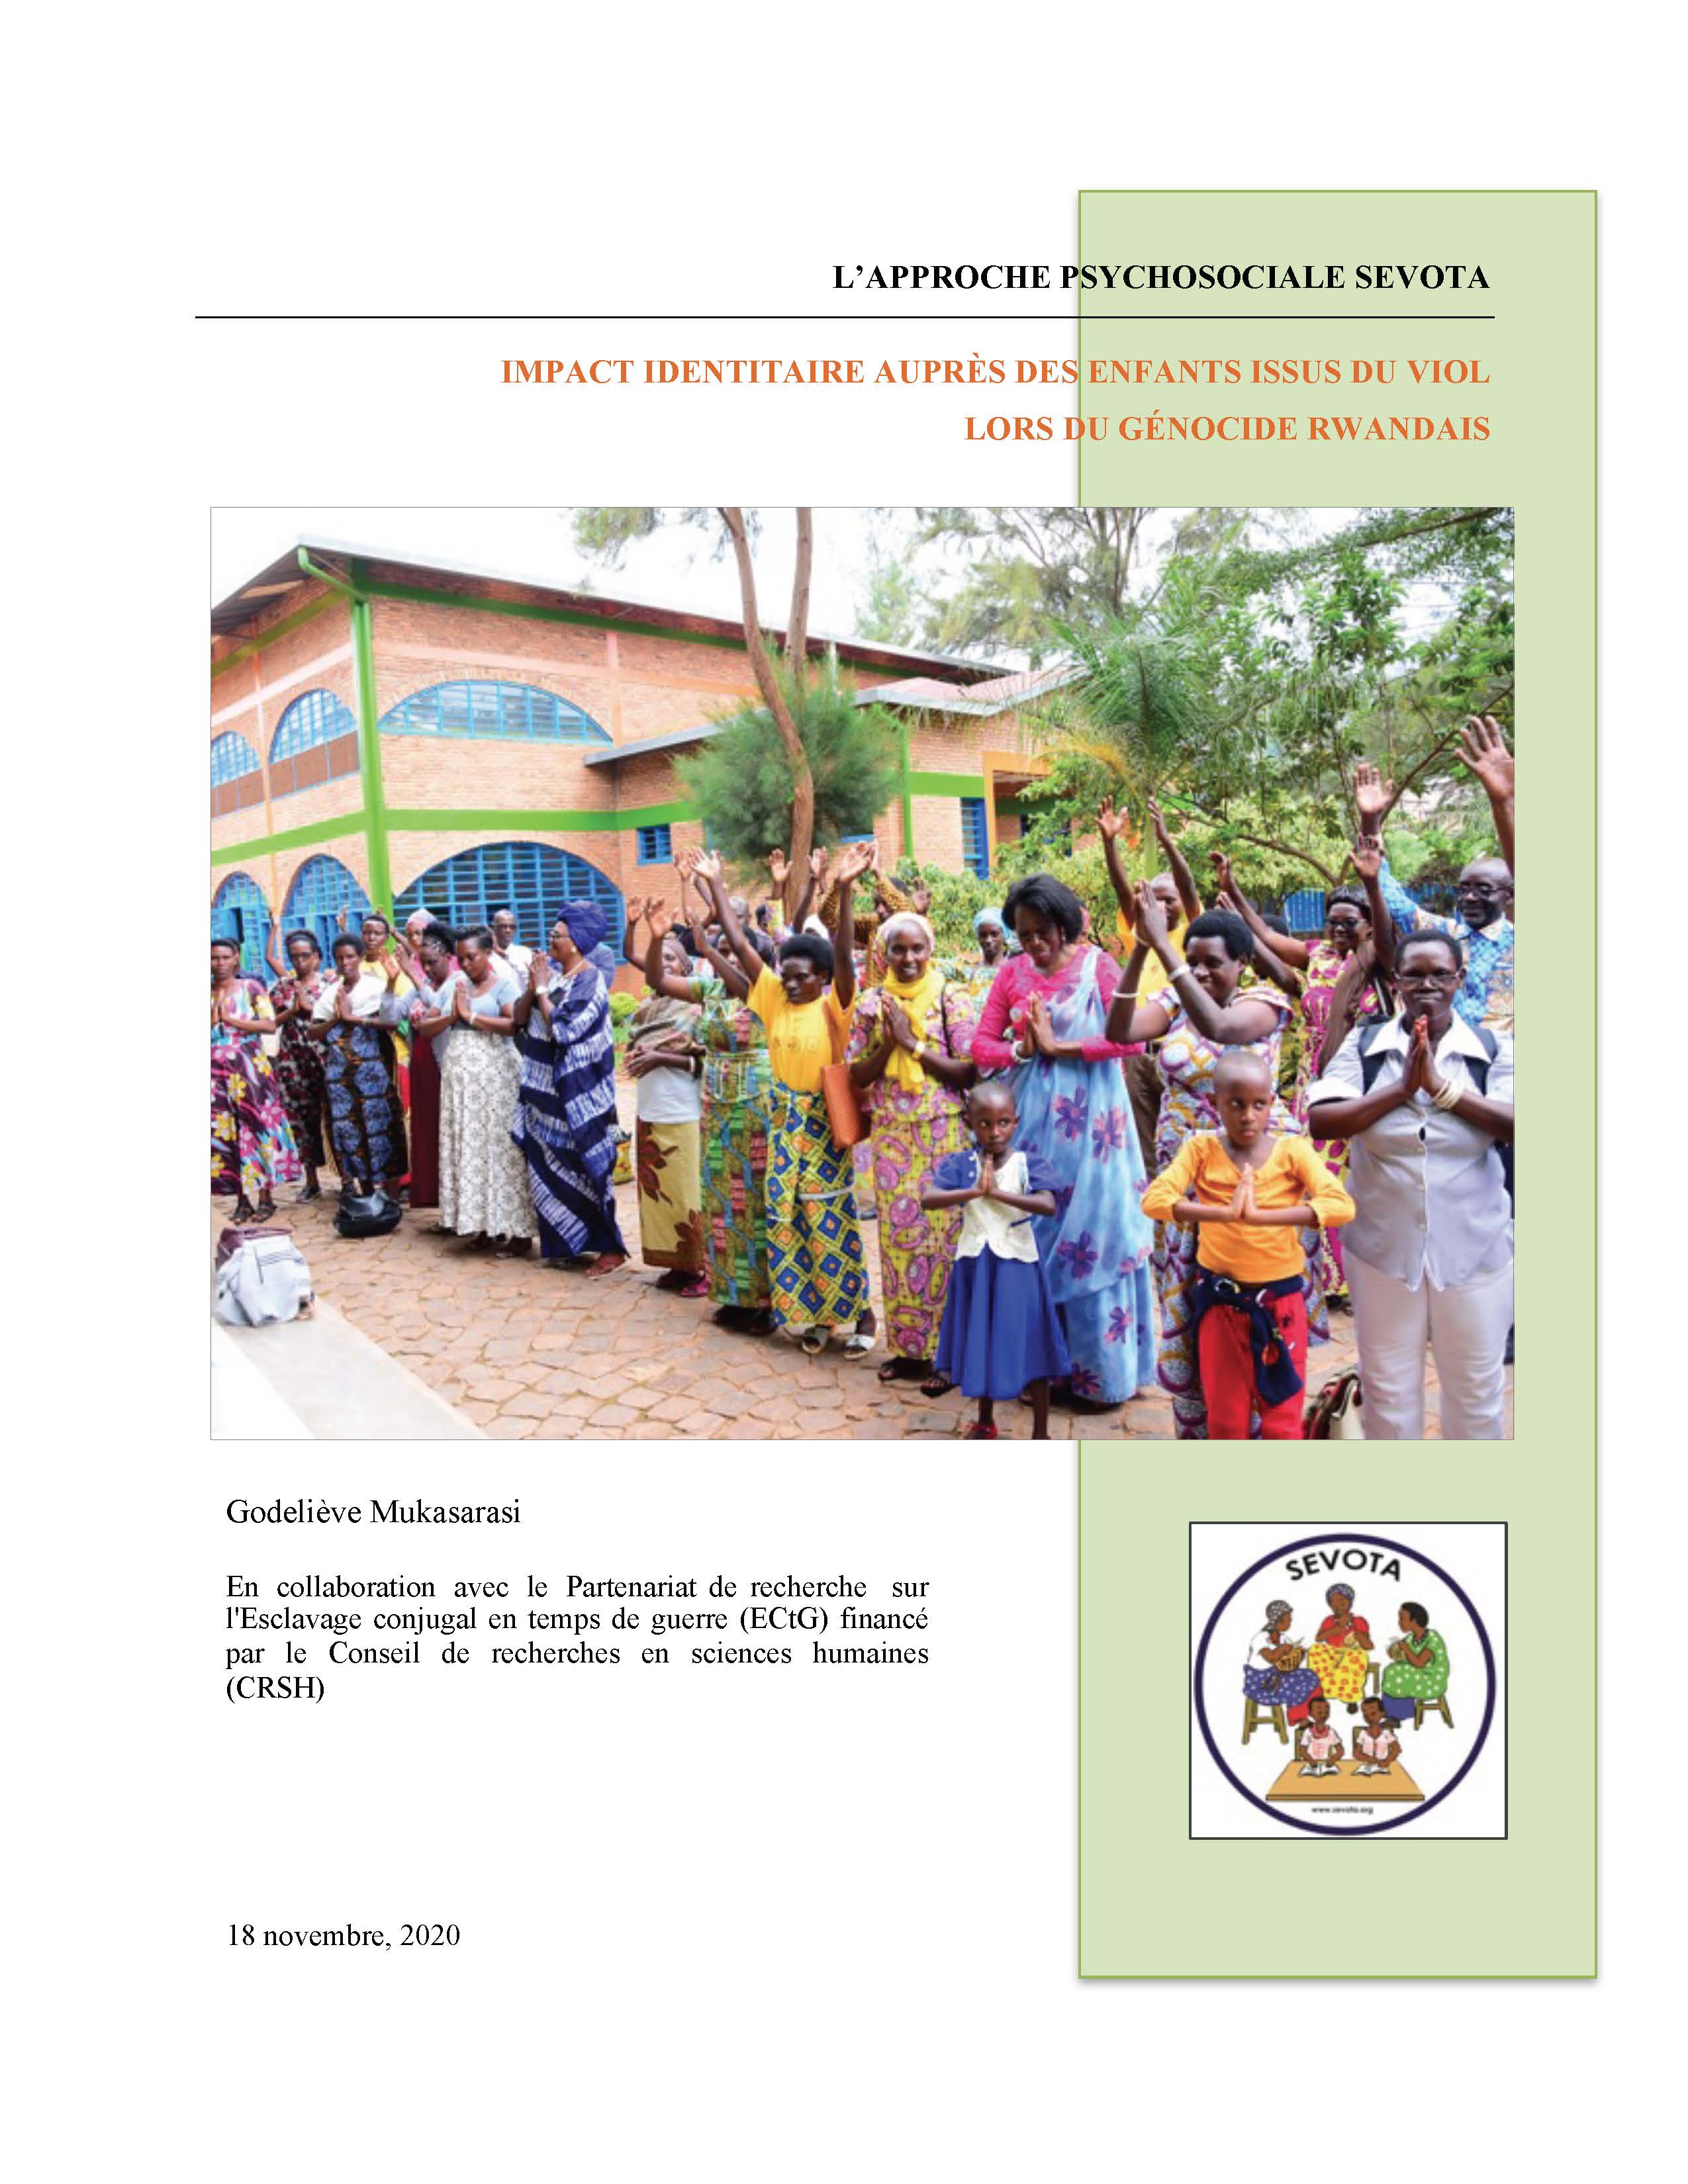 SEVOTA’s psychosocial approach: Impacting the identify of children born of sexual violence during the Rwandan genocide